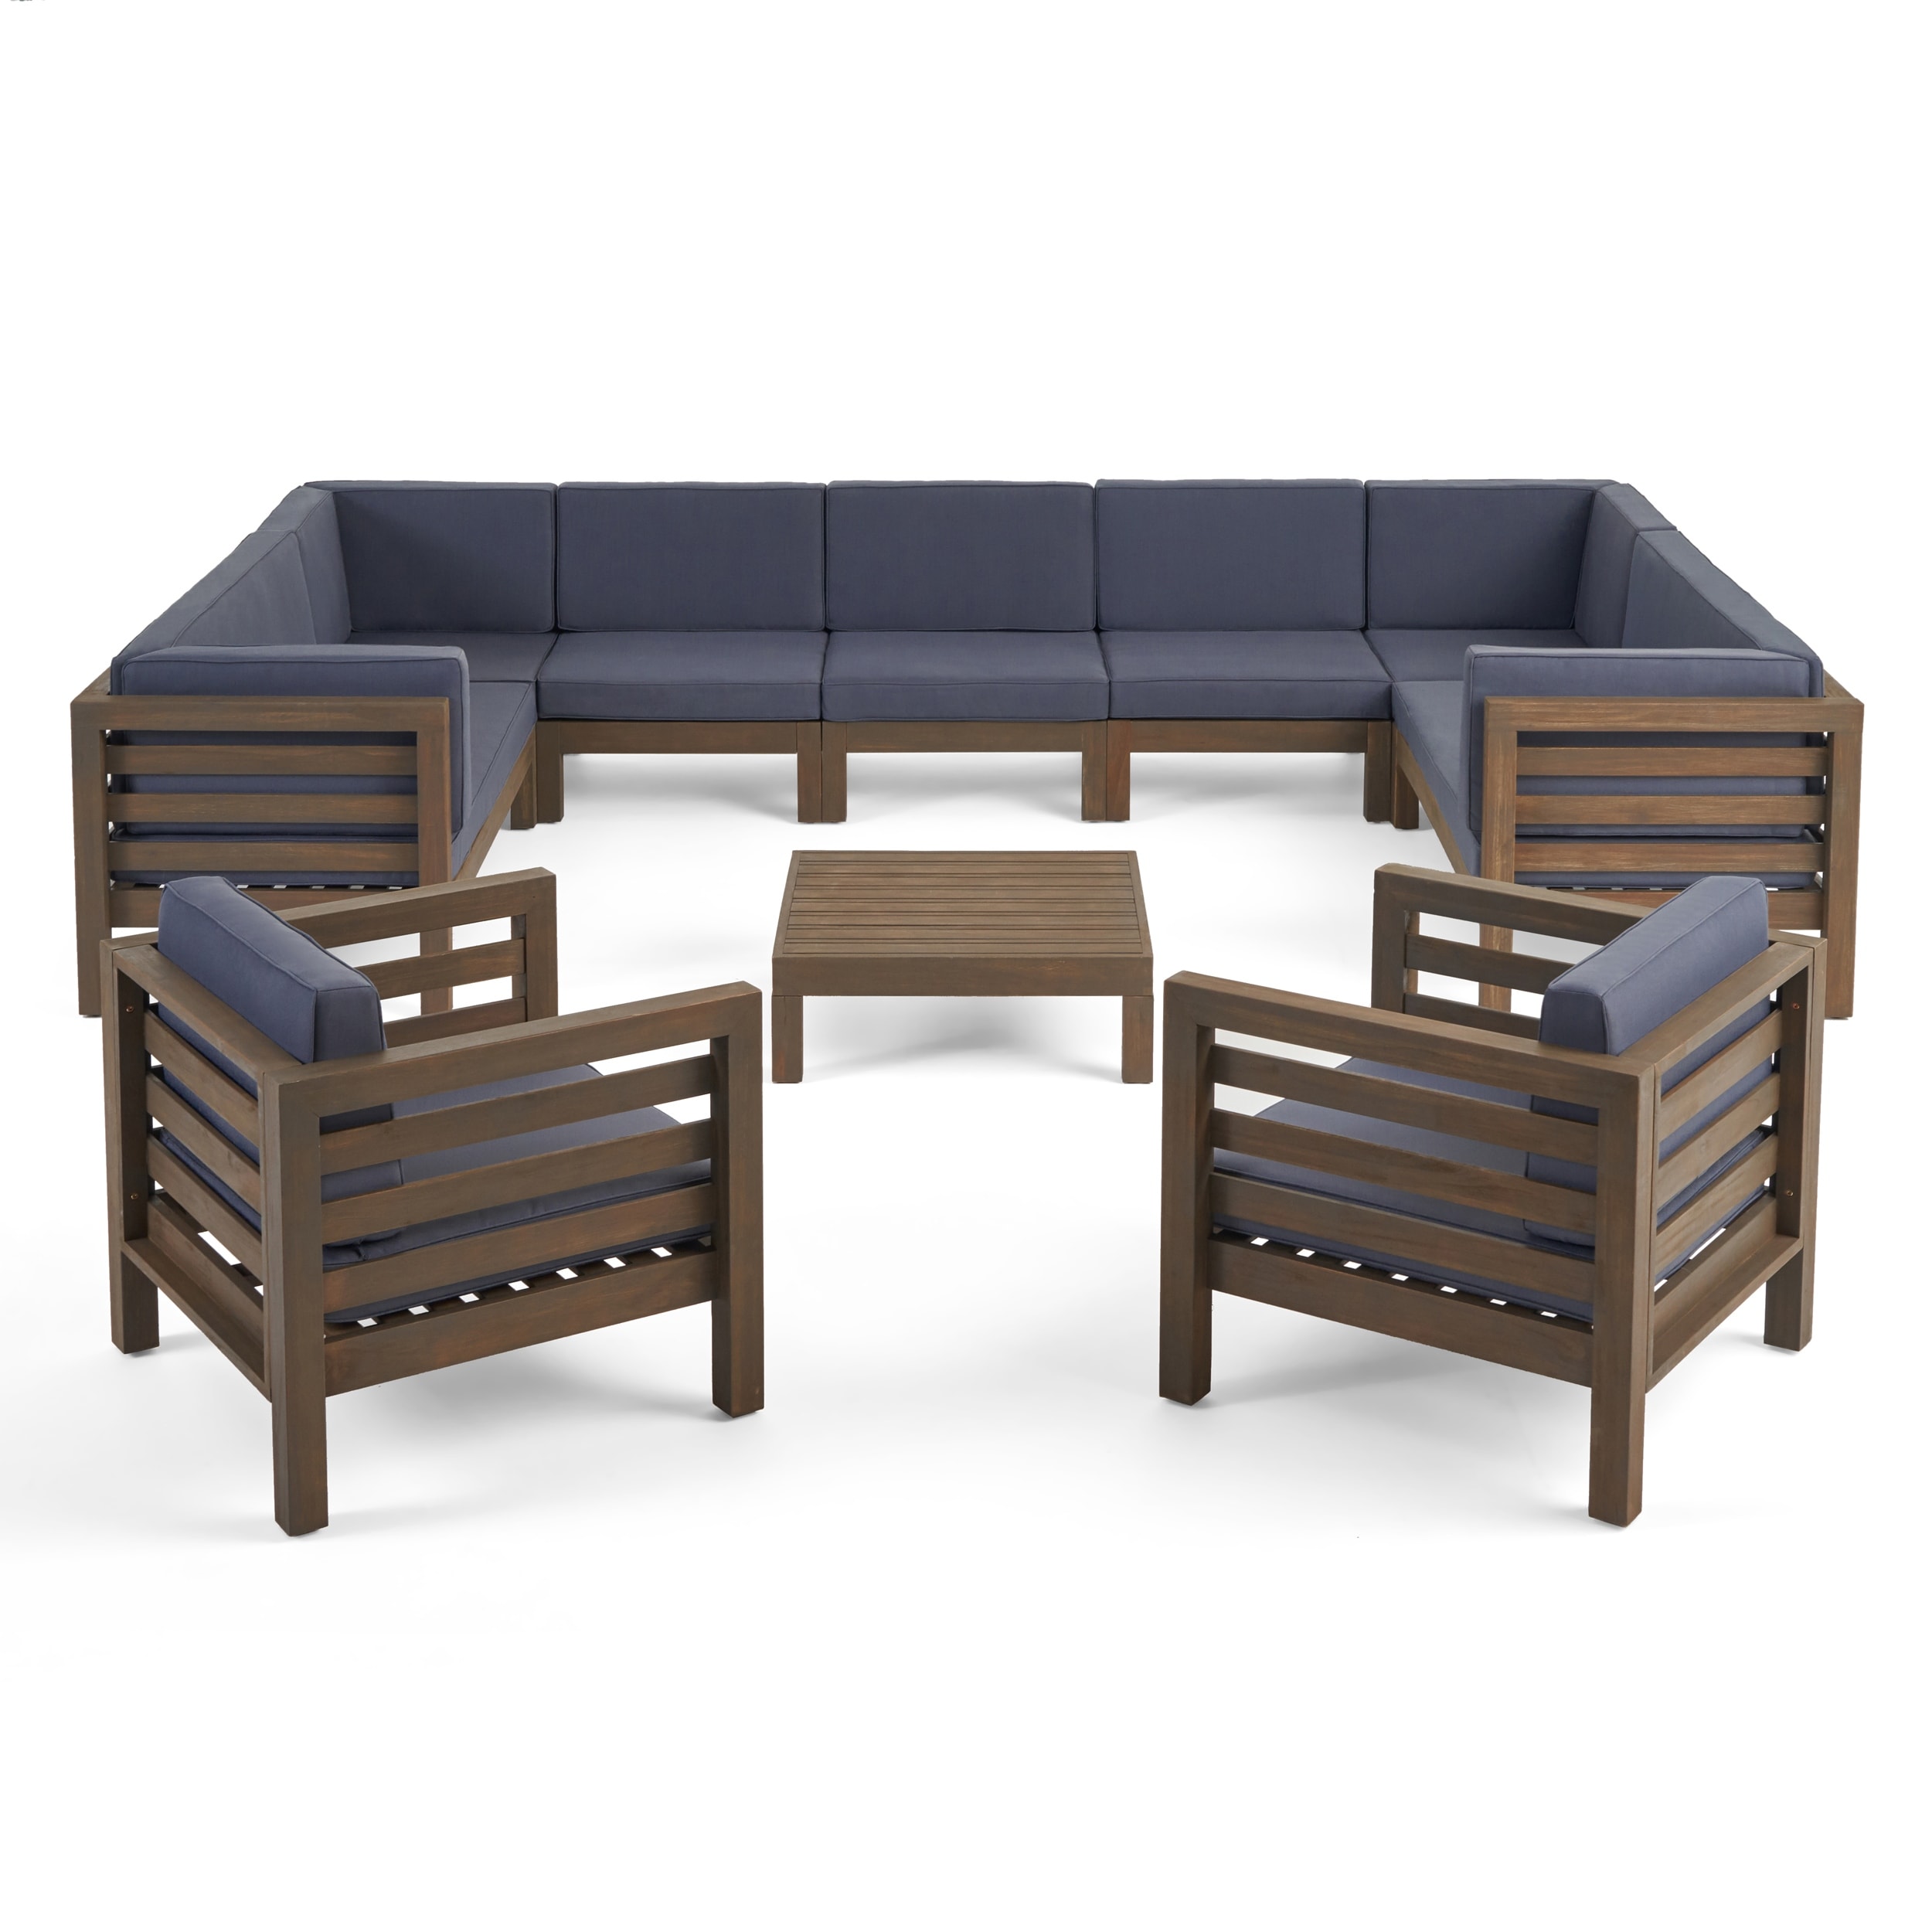 Oana Outdoor 11 Seater Acacia Wood Sectional Sofa And Club Chair Set By Christopher Knight Home